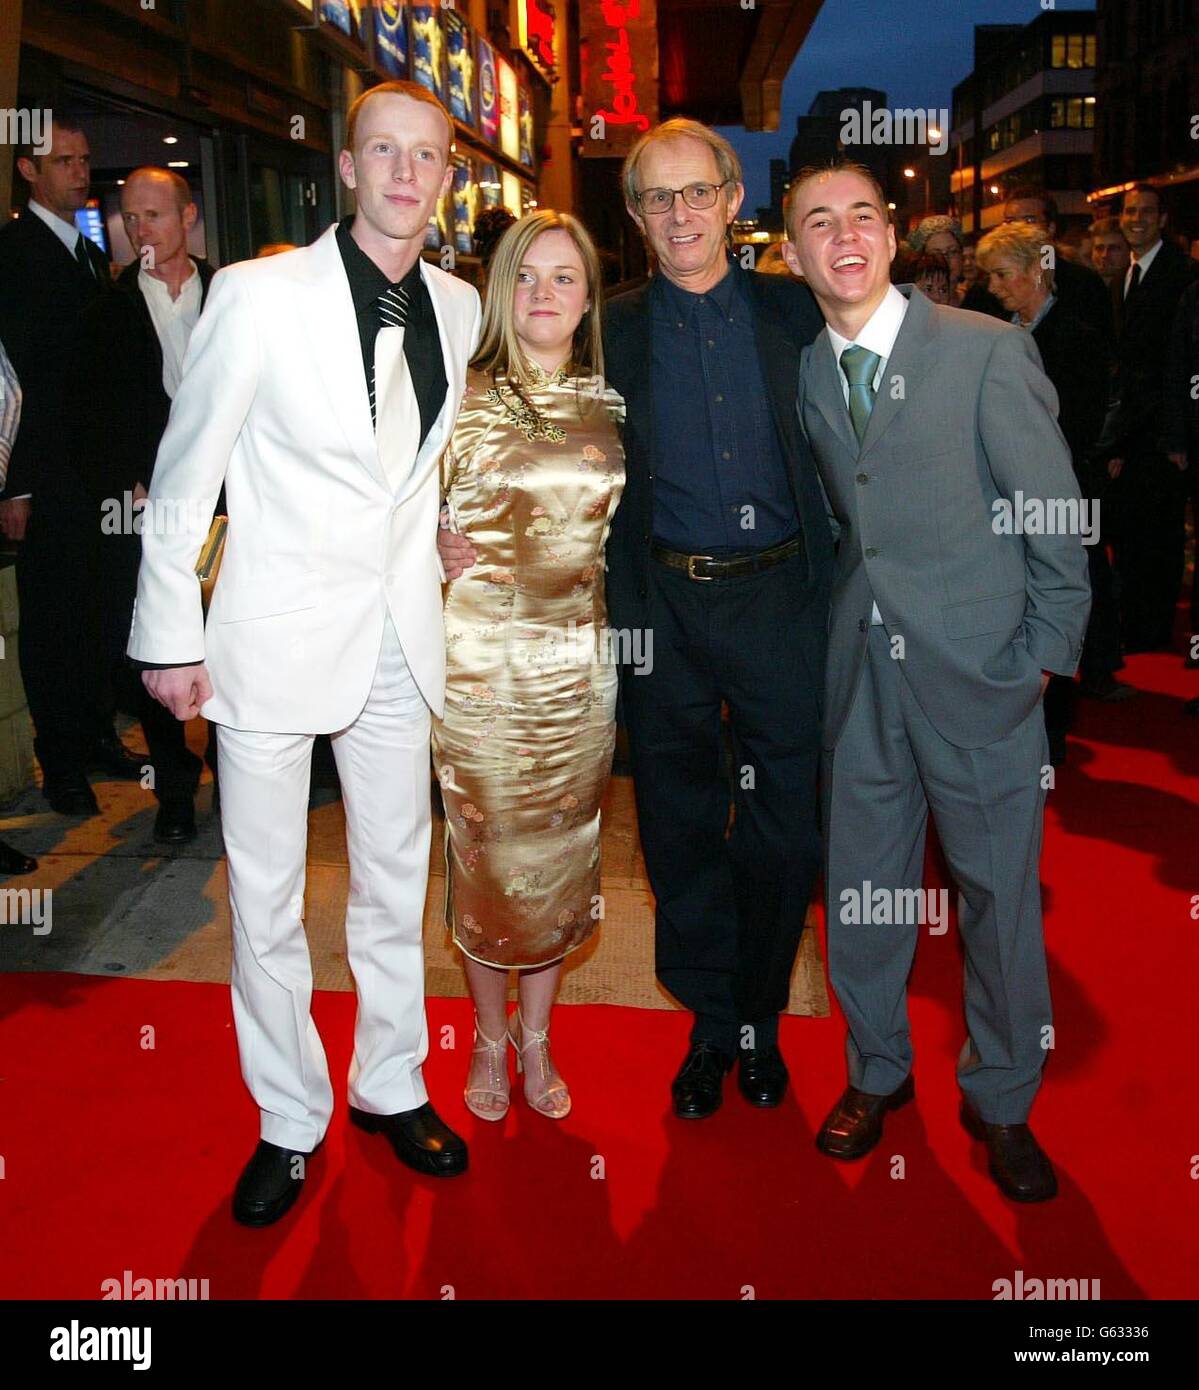 (l/r) William Ruane with Annemarie Fulton, Ken Loach, and Martin Compston, arriving at the UK Premiere of British Director Ken Loach's new film Sweet Sixteen, at the UGC Cinema, Glasgow. * The Scottish film about a 16-year-old boy who dreams of a family life that he has never had. Stock Photo